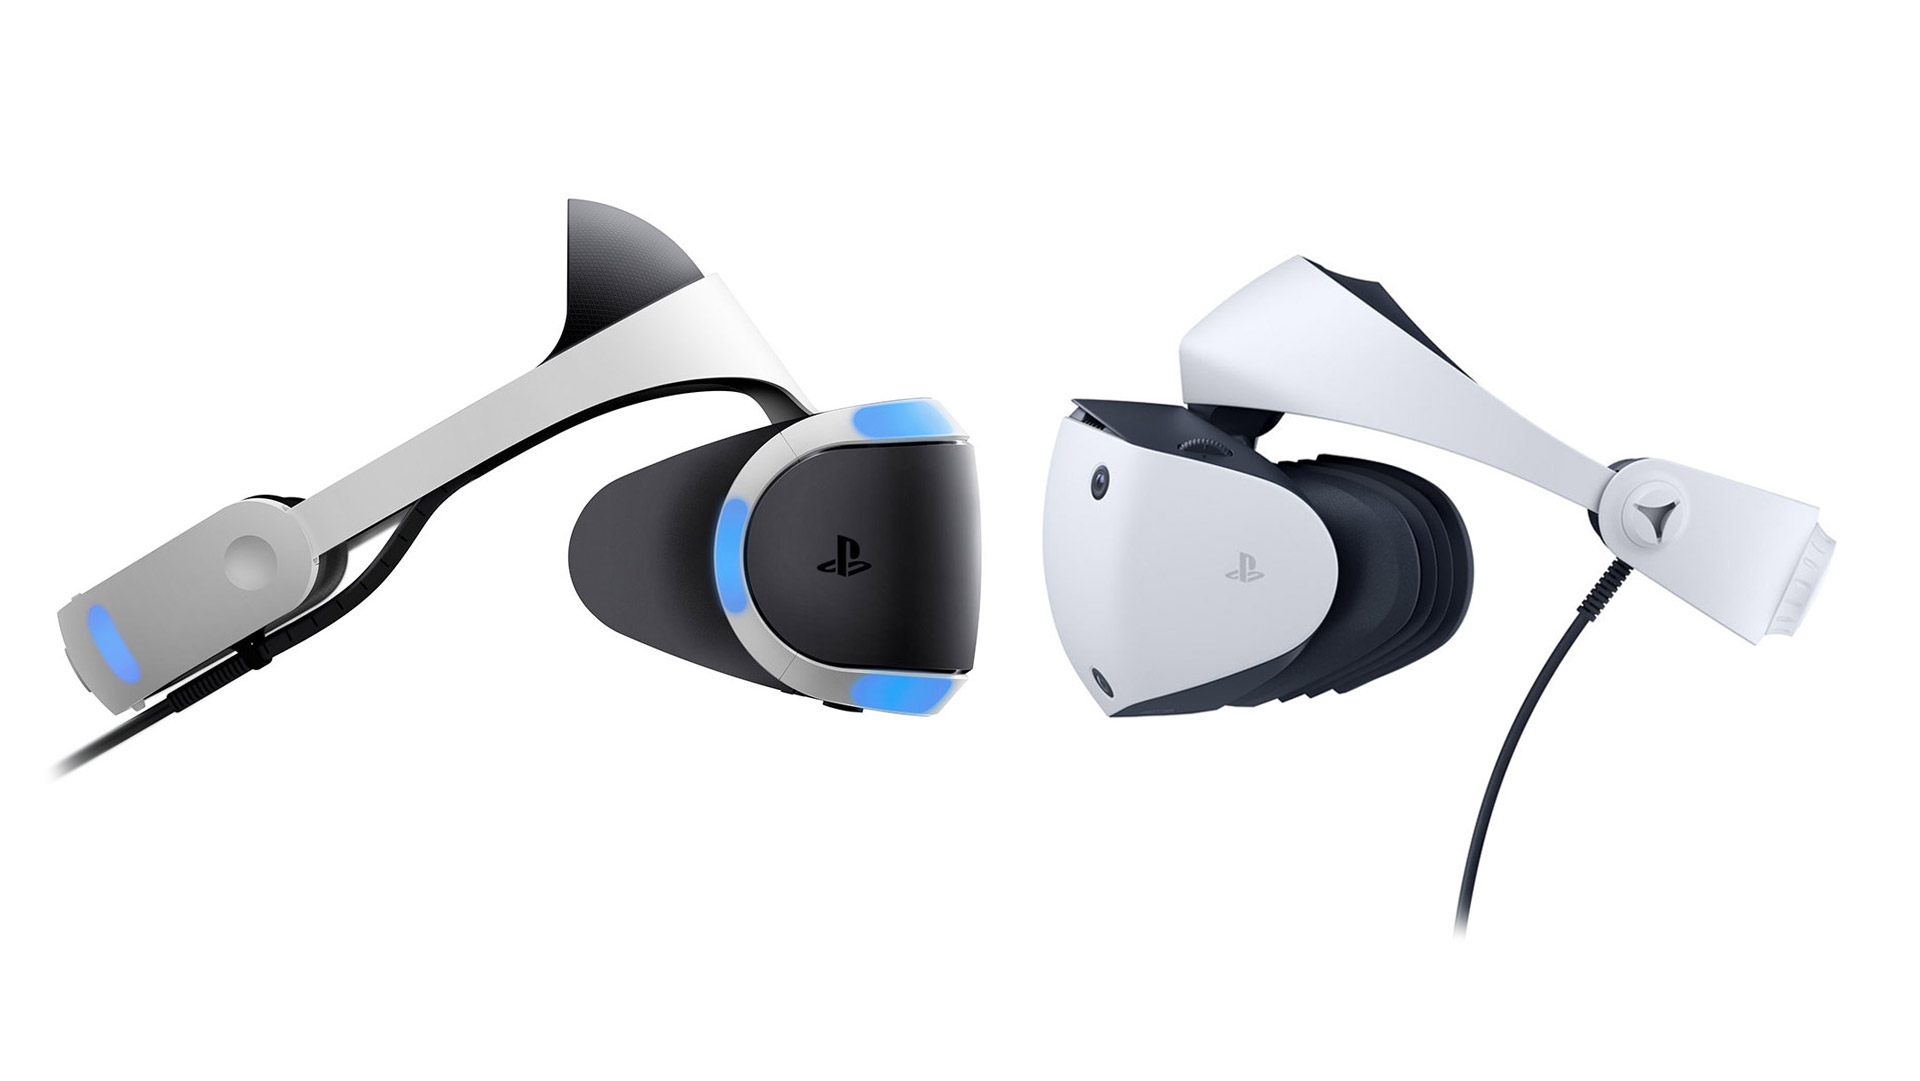 Feel a New Real  PS VR2 